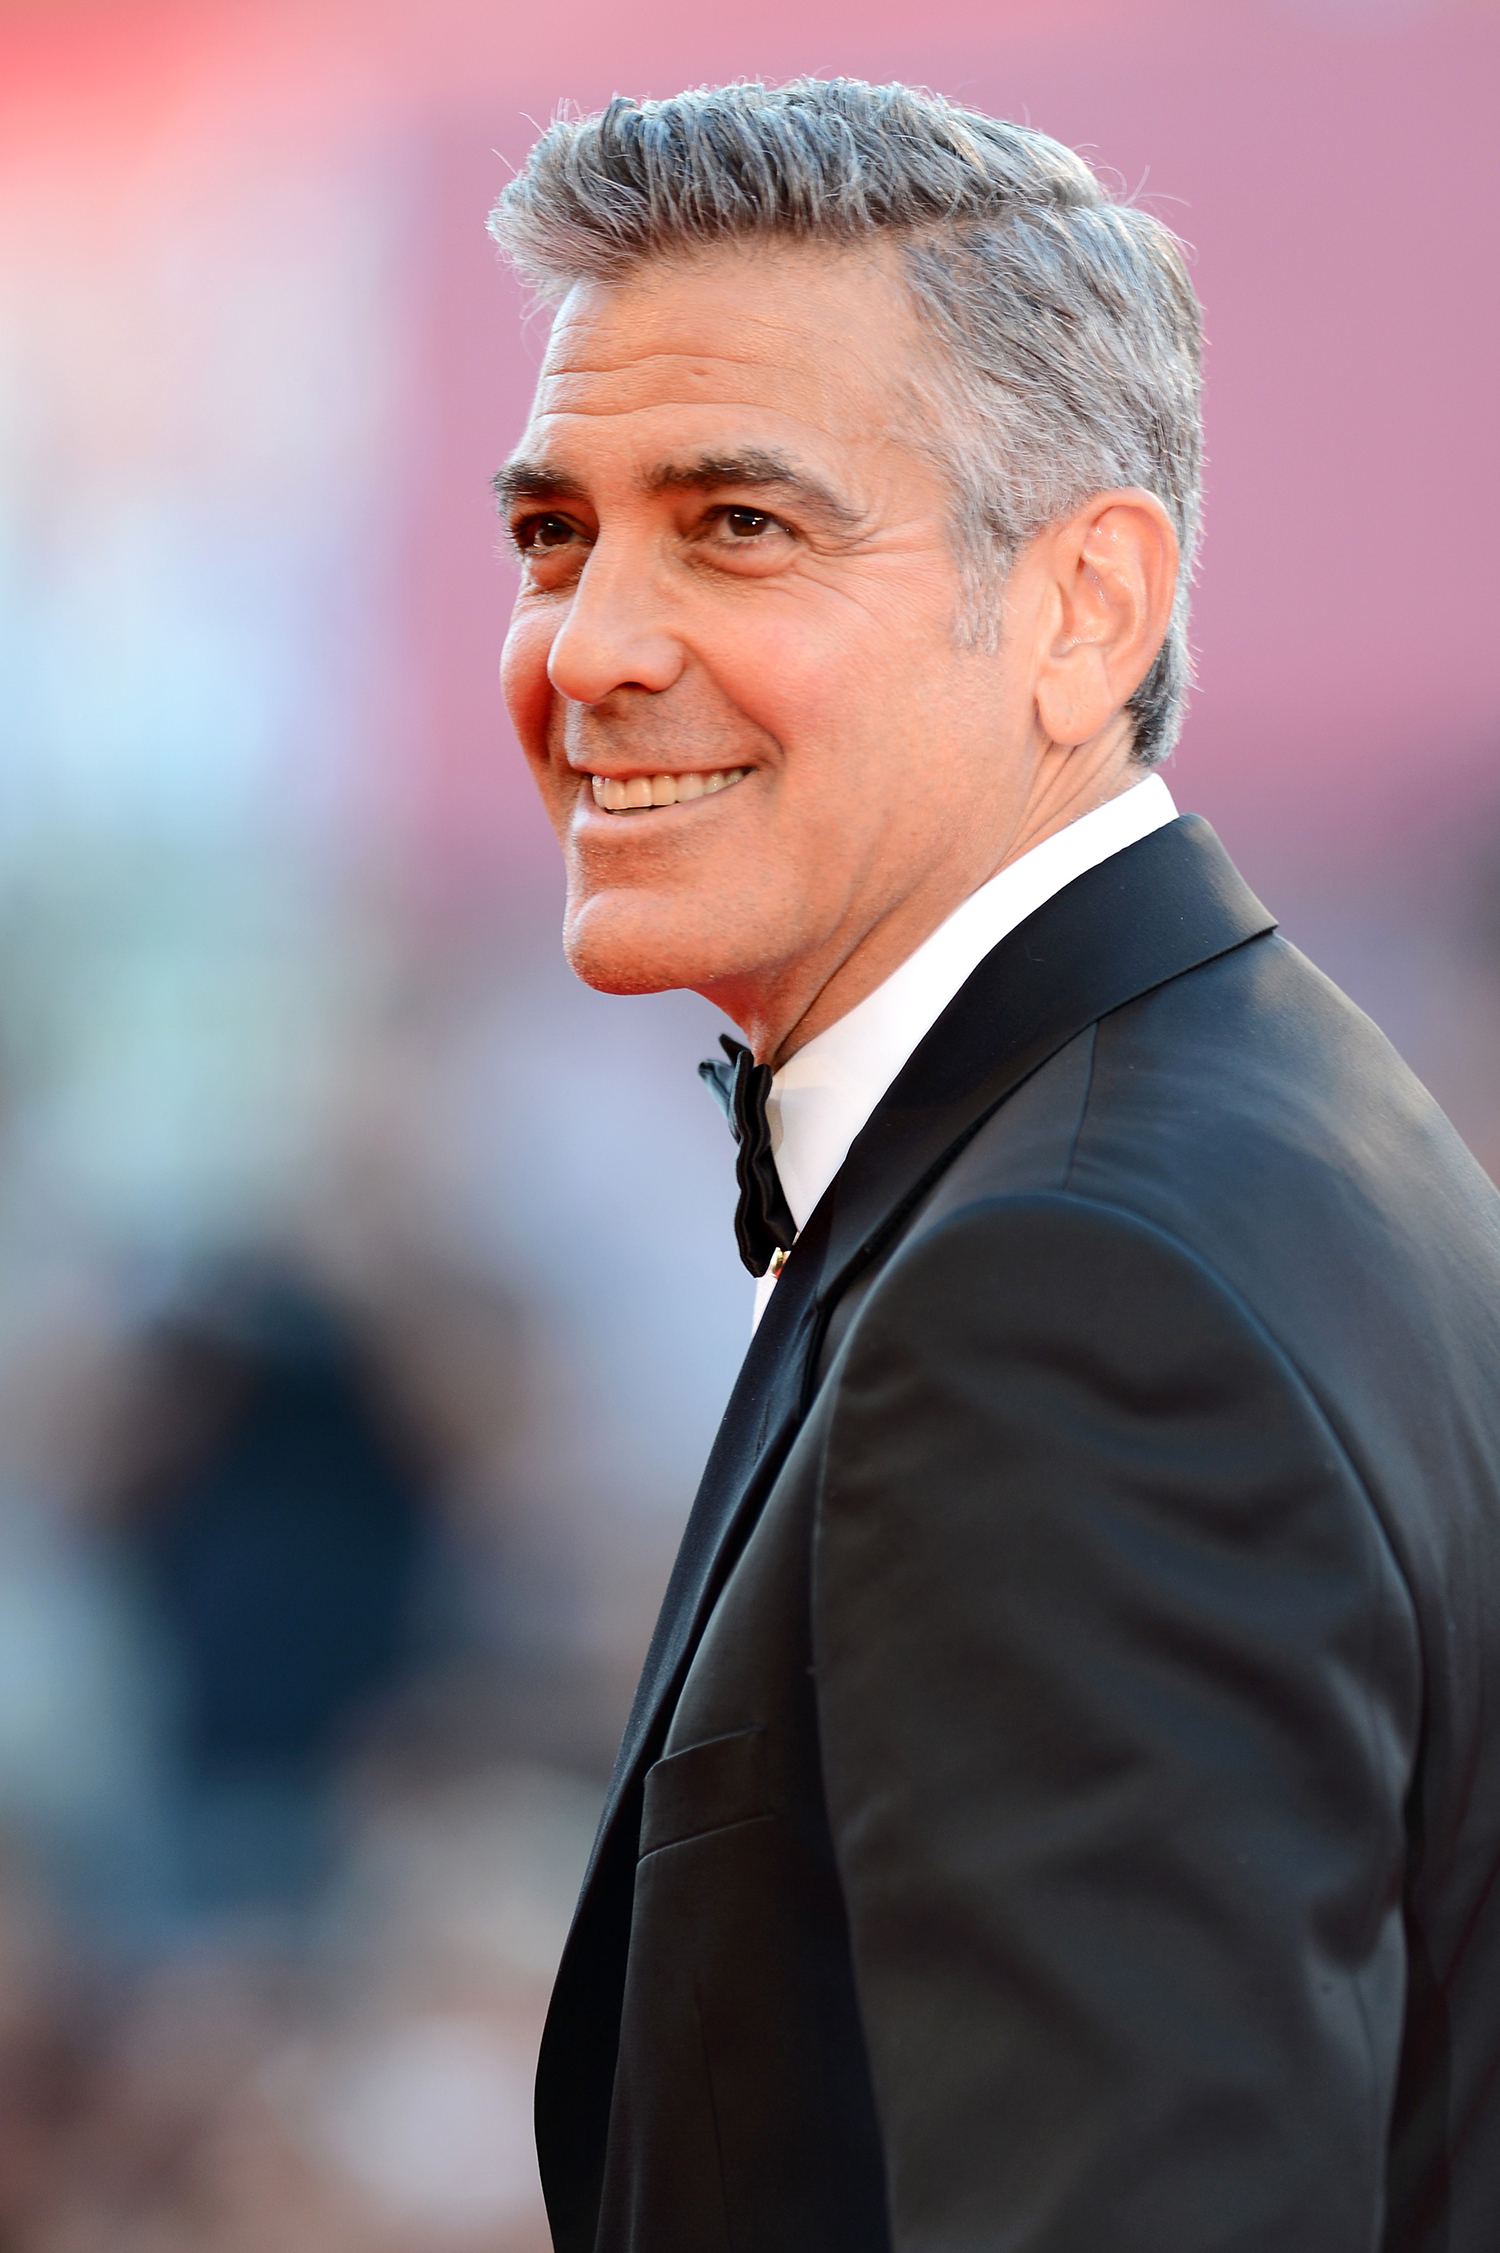 George Clooney - Clooney's closely trimmed hair steals red carpets and casino fortunes alike.Photo: Ian Gavan/Getty Images